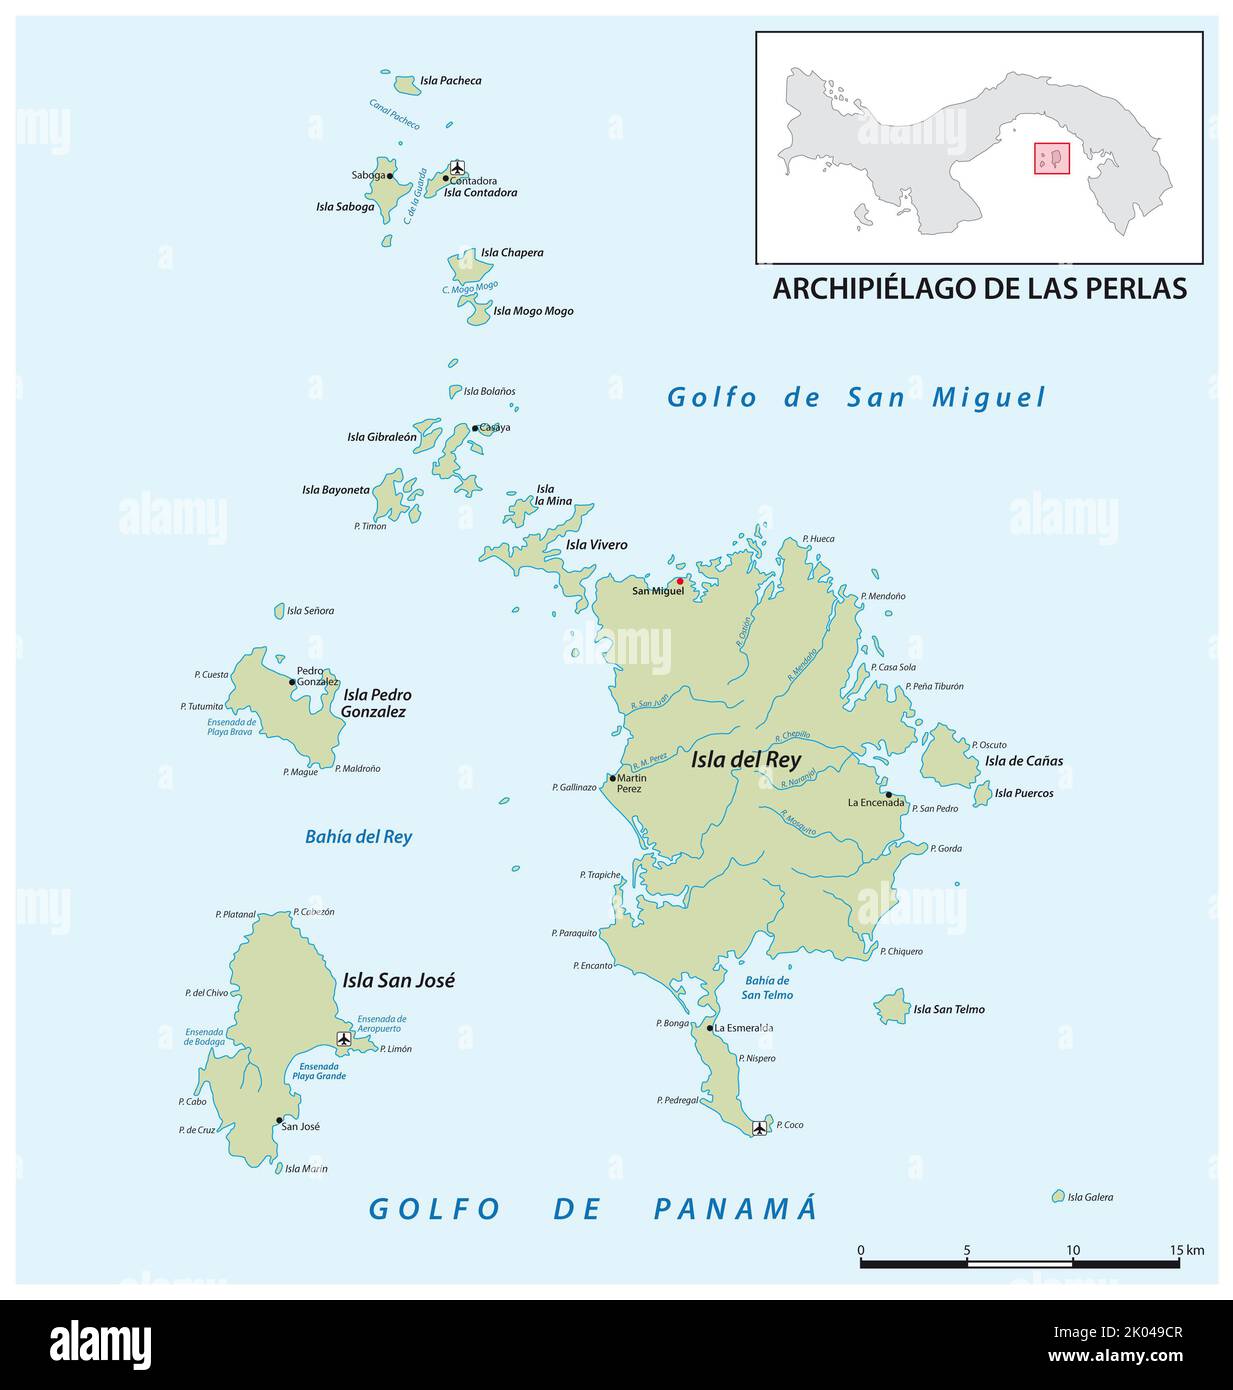 Vector map of the panamese archipelago pearl islands in the gulf of panama Stock Photo